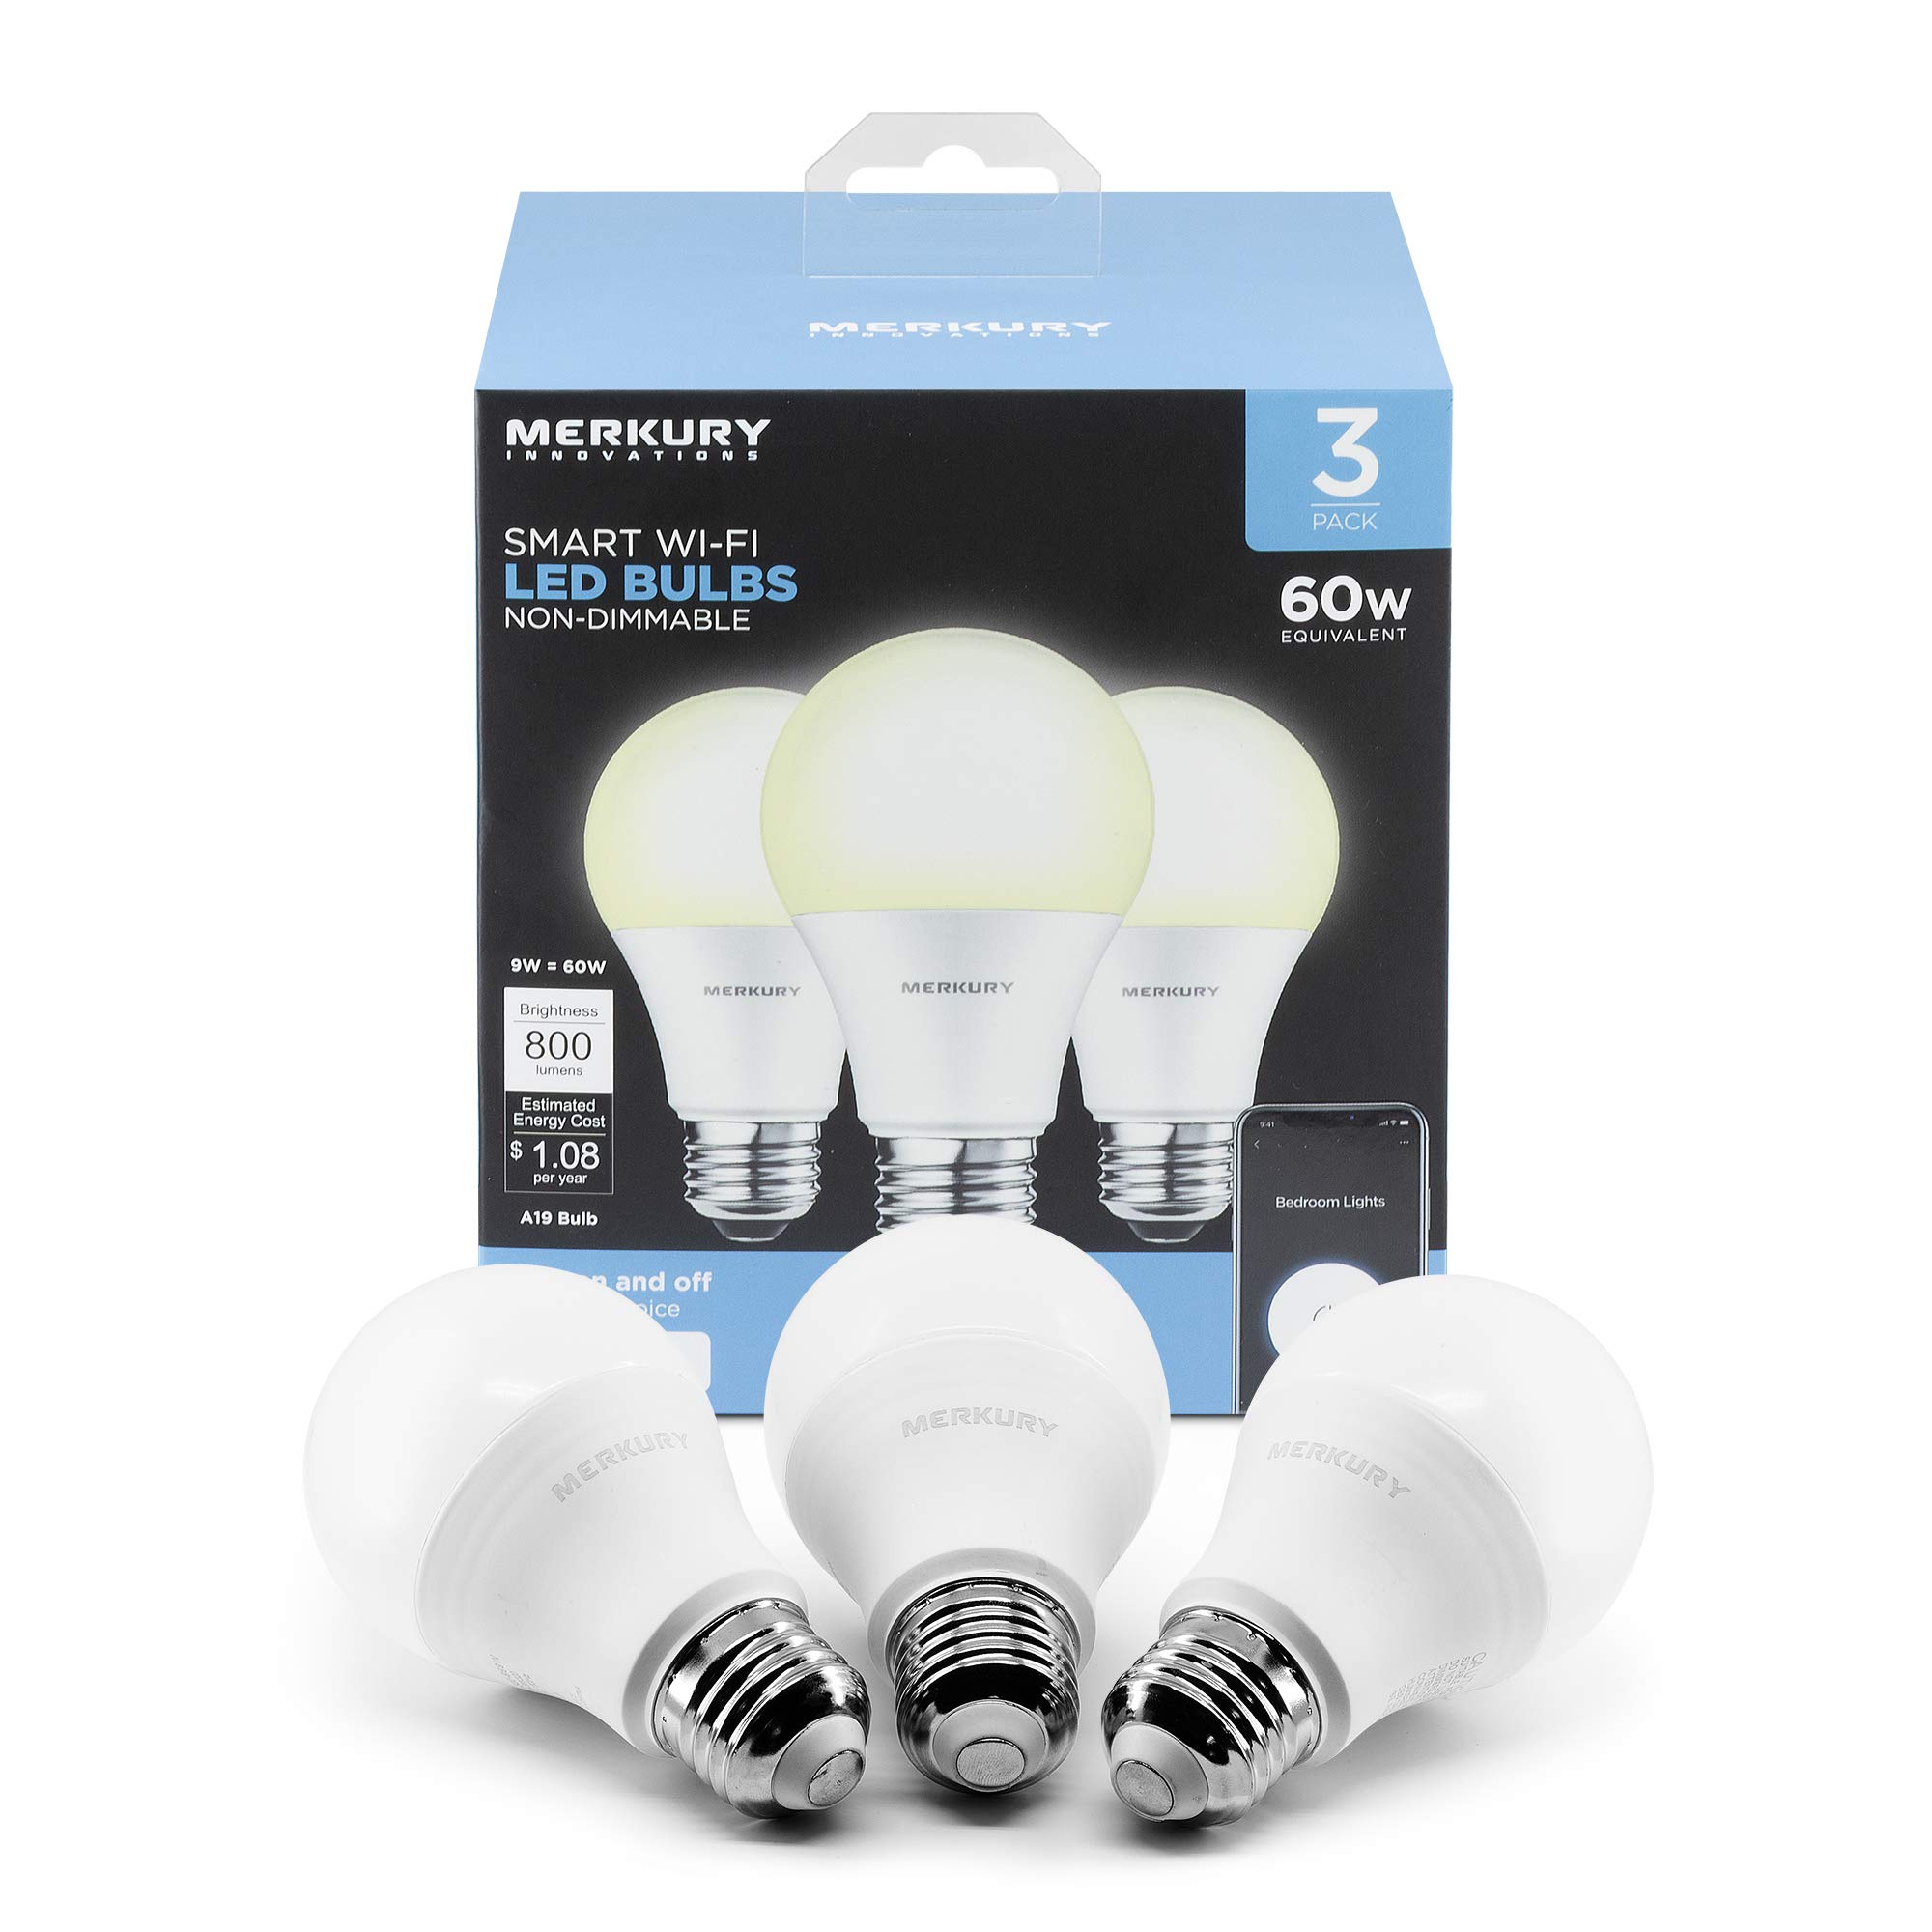 Merkury Innovations A19 Smart White LED Bulb 60W Non-Dimmable 3-Pack, Voice Control, Hub Compatible, 9 Watt, 800 Lumens, 3 Pack